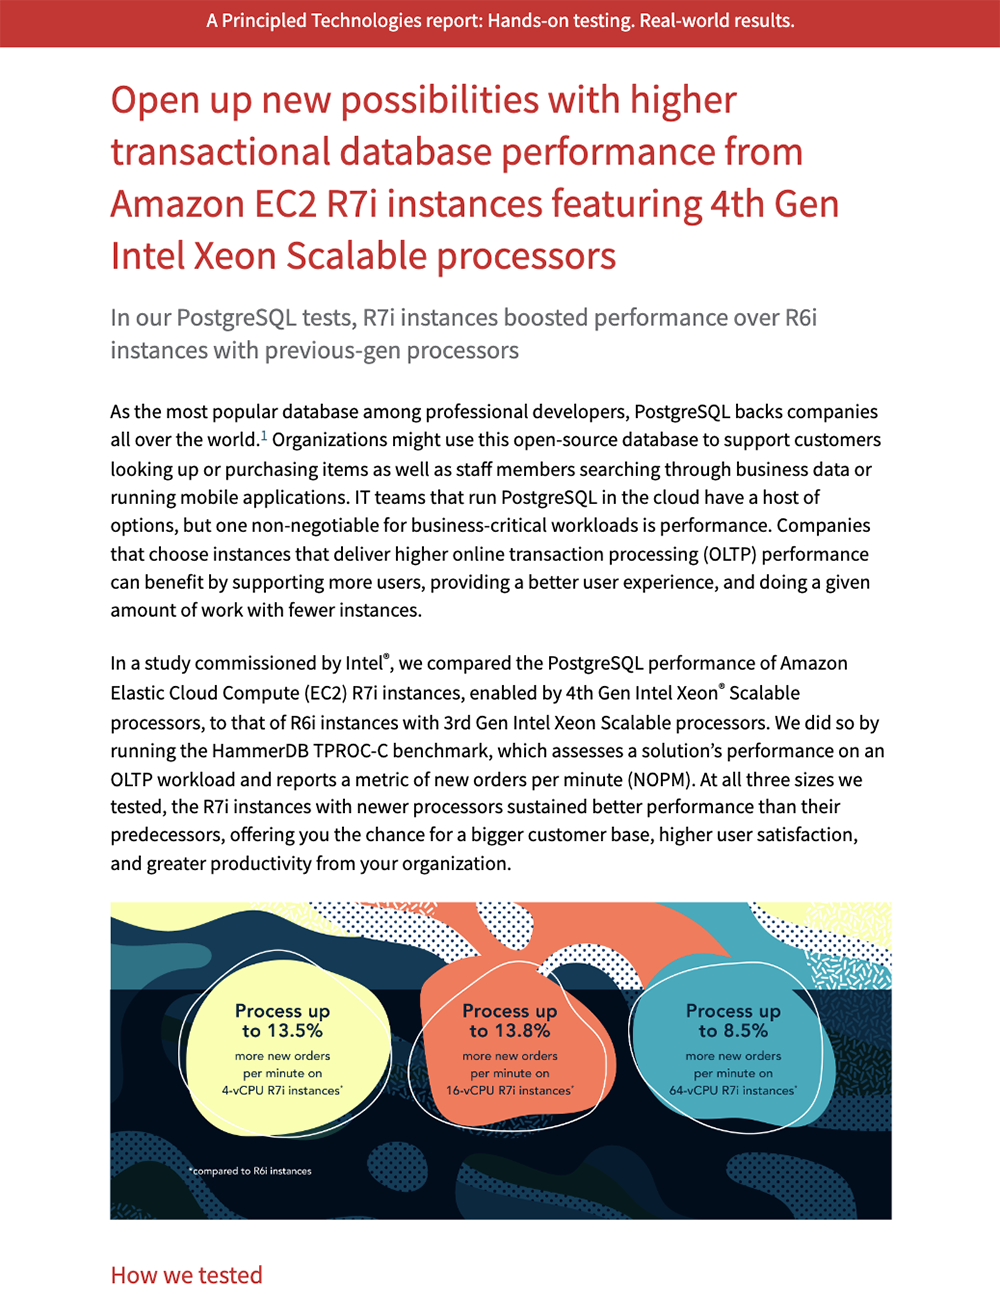 Open up new possibilities with higher transactional database performance from Amazon EC2 R7i instances featuring 4th Gen Intel Xeon Scalable processors 